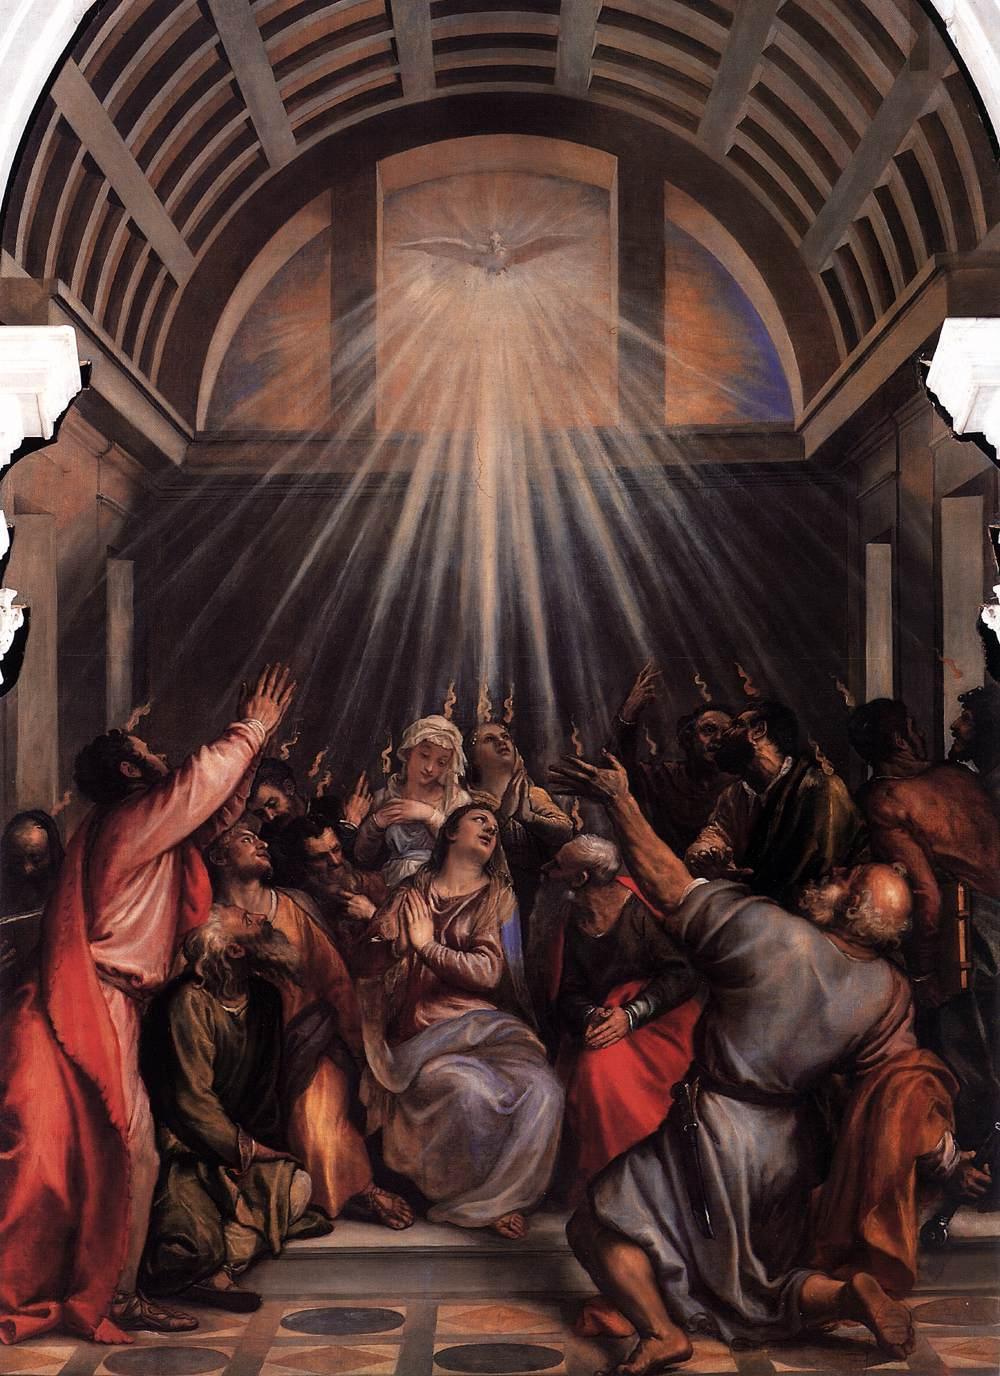 Tiziano Vecellio, The Descent of the Holy Ghost, 1545 Pentecost Sunday Today we celebrate the feast of Pentecost, alleluia; on this day the Holy Spirit appeared before the apostles in tongues of fire